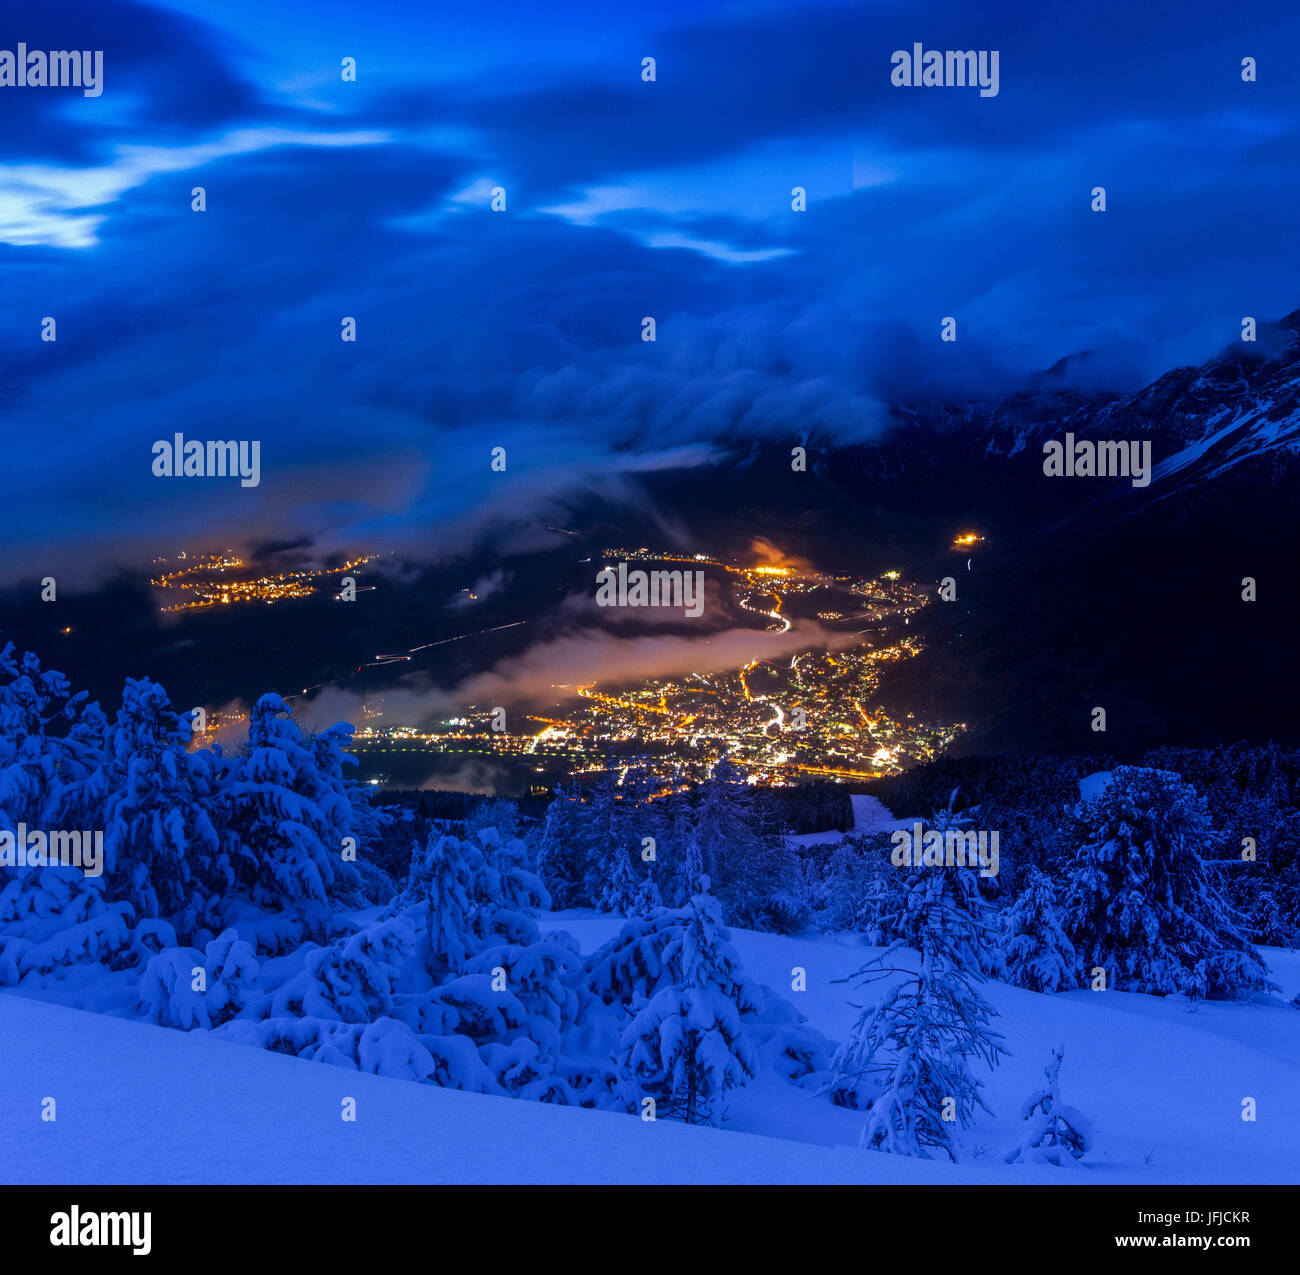 Europe, Italy, Lombardy, Sondrio, Bormio at blue hour after a snowfall in winter, Turistic places of italian Alps Stock Photo